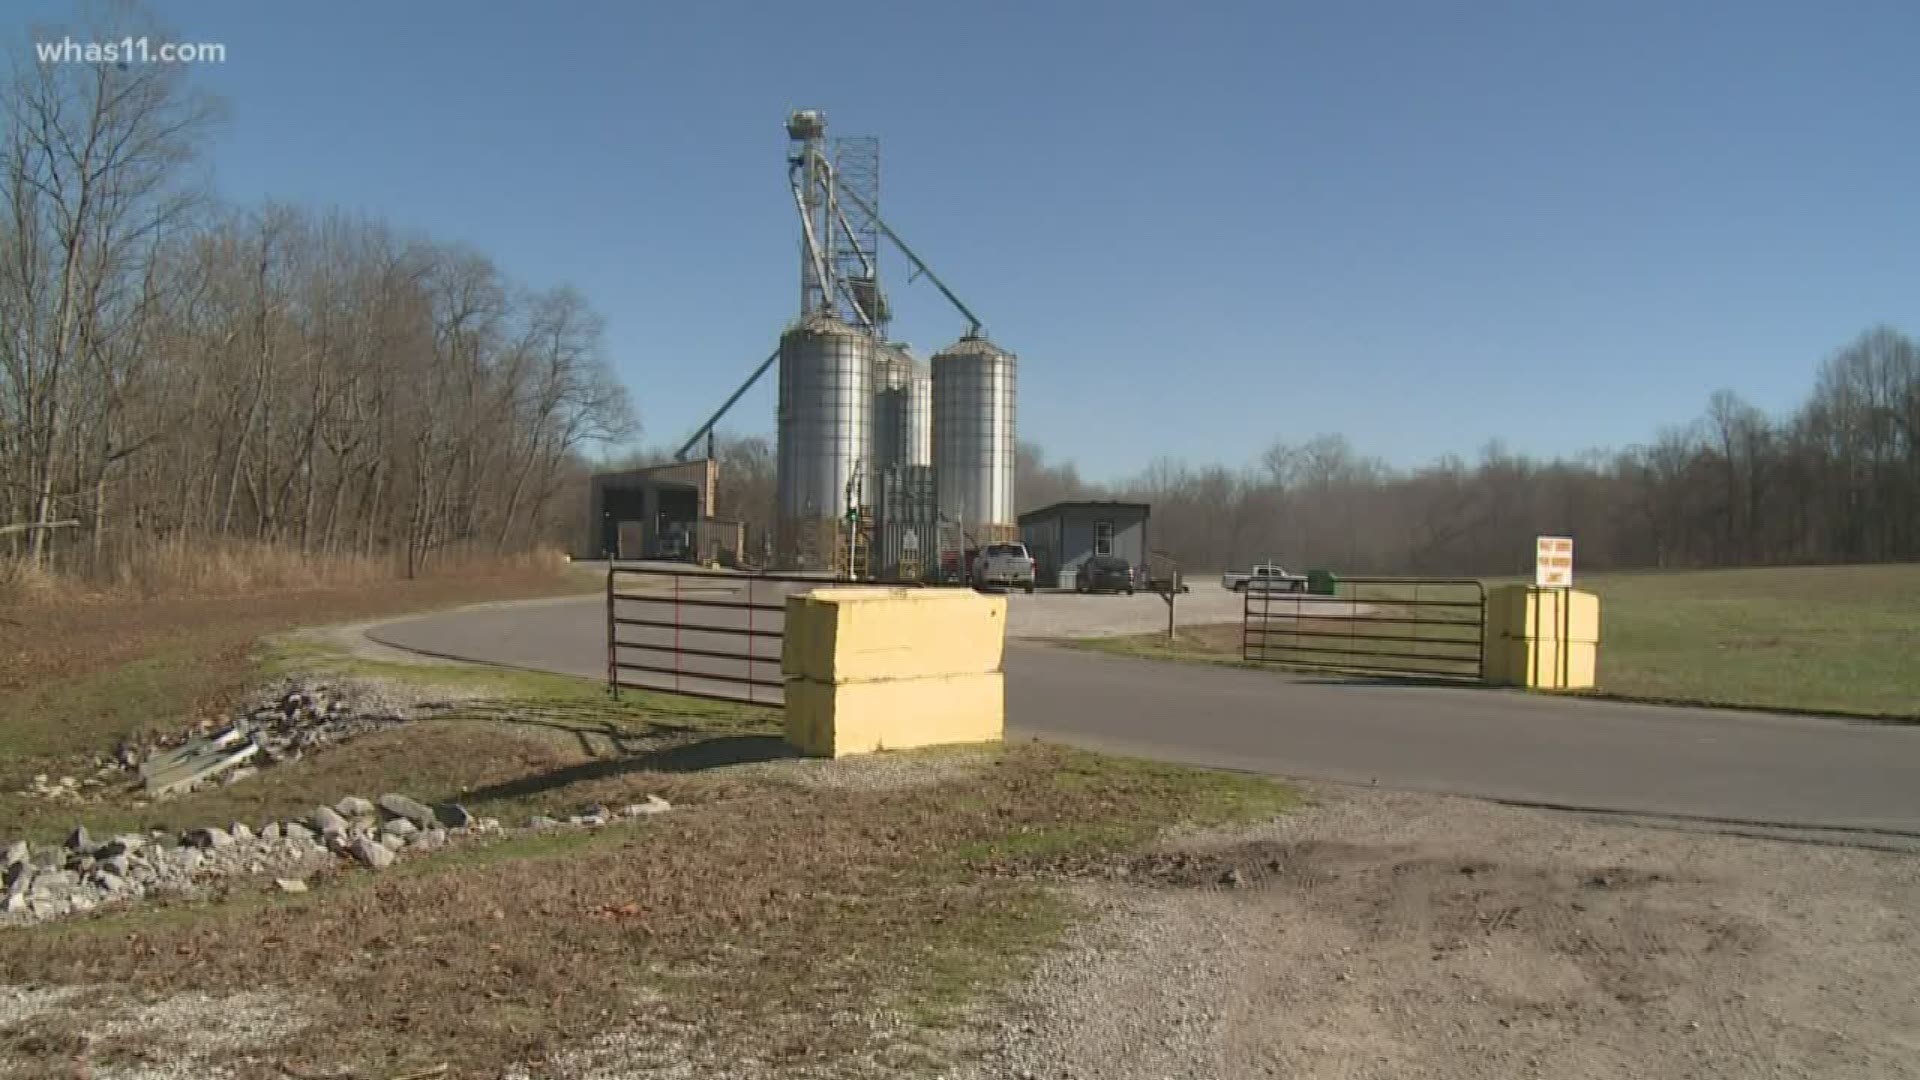 That conversation included questions about the issues facing agriculture now that the Meade County grain elevator is closing to make way for the $1.3 billion project